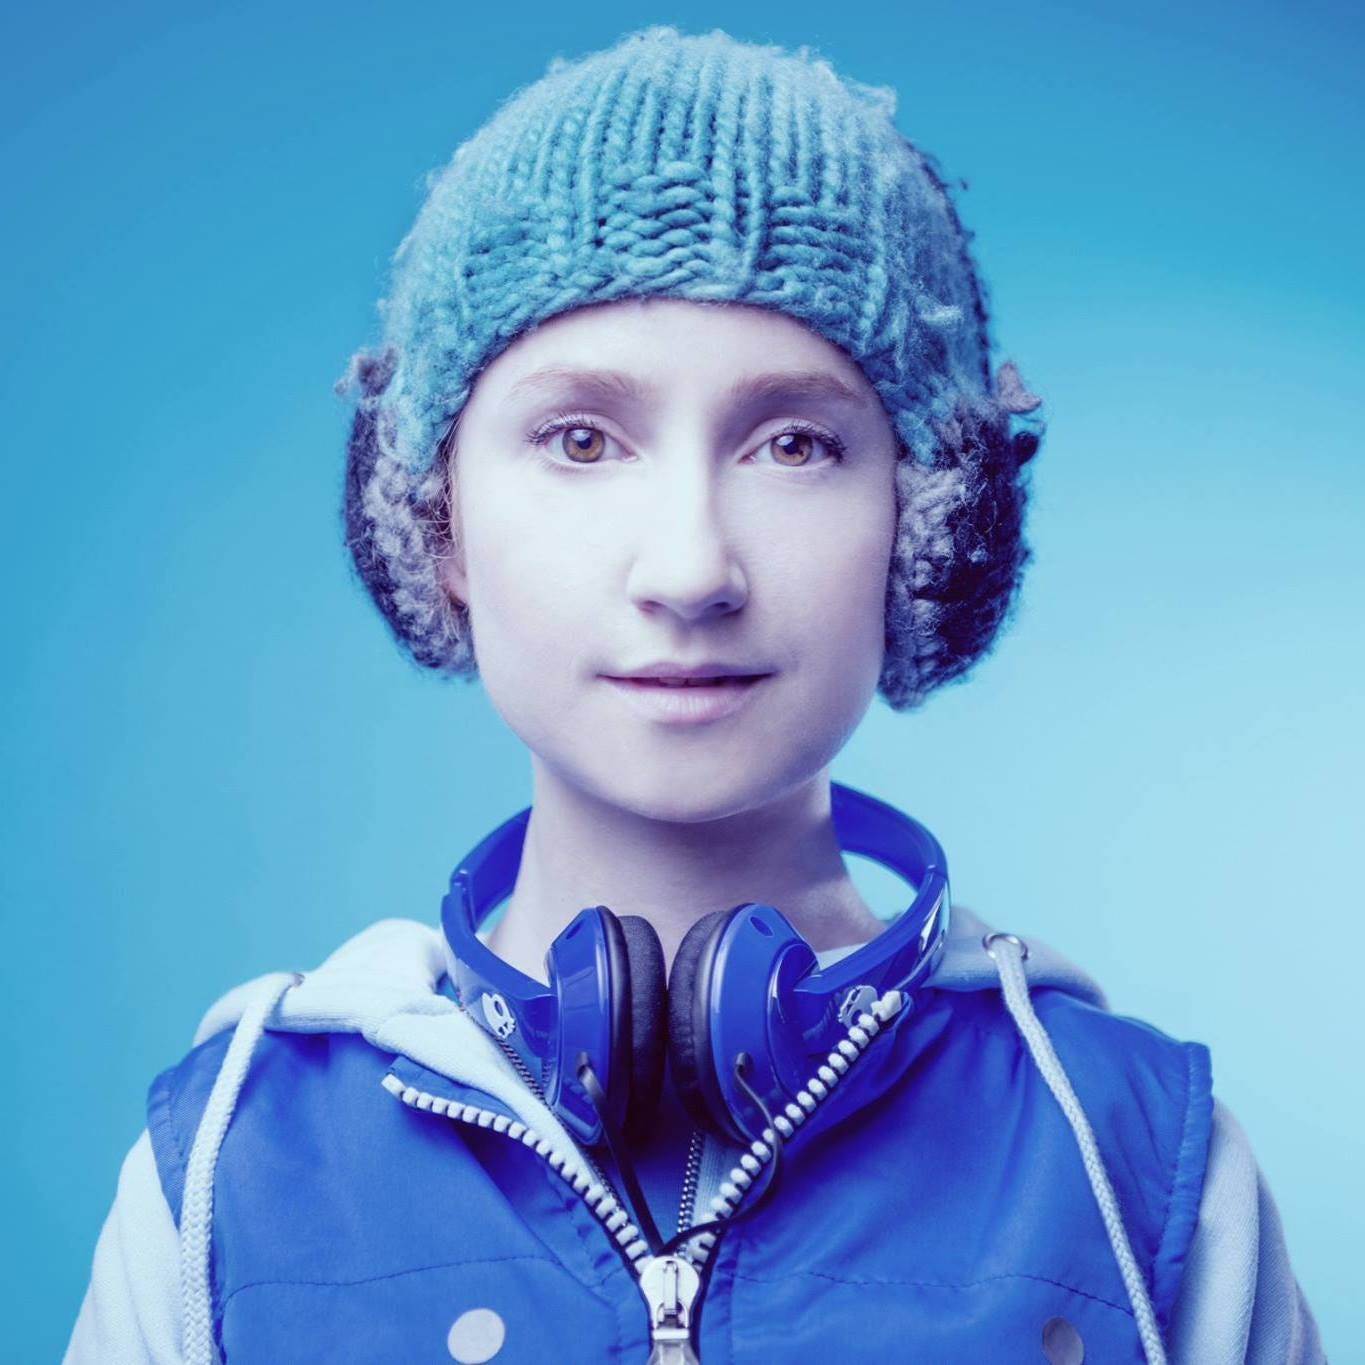 woman dressed as a 15 year old in a woollen hat with knitted in headphones and headphones around her neck. Blue tone to the whole image